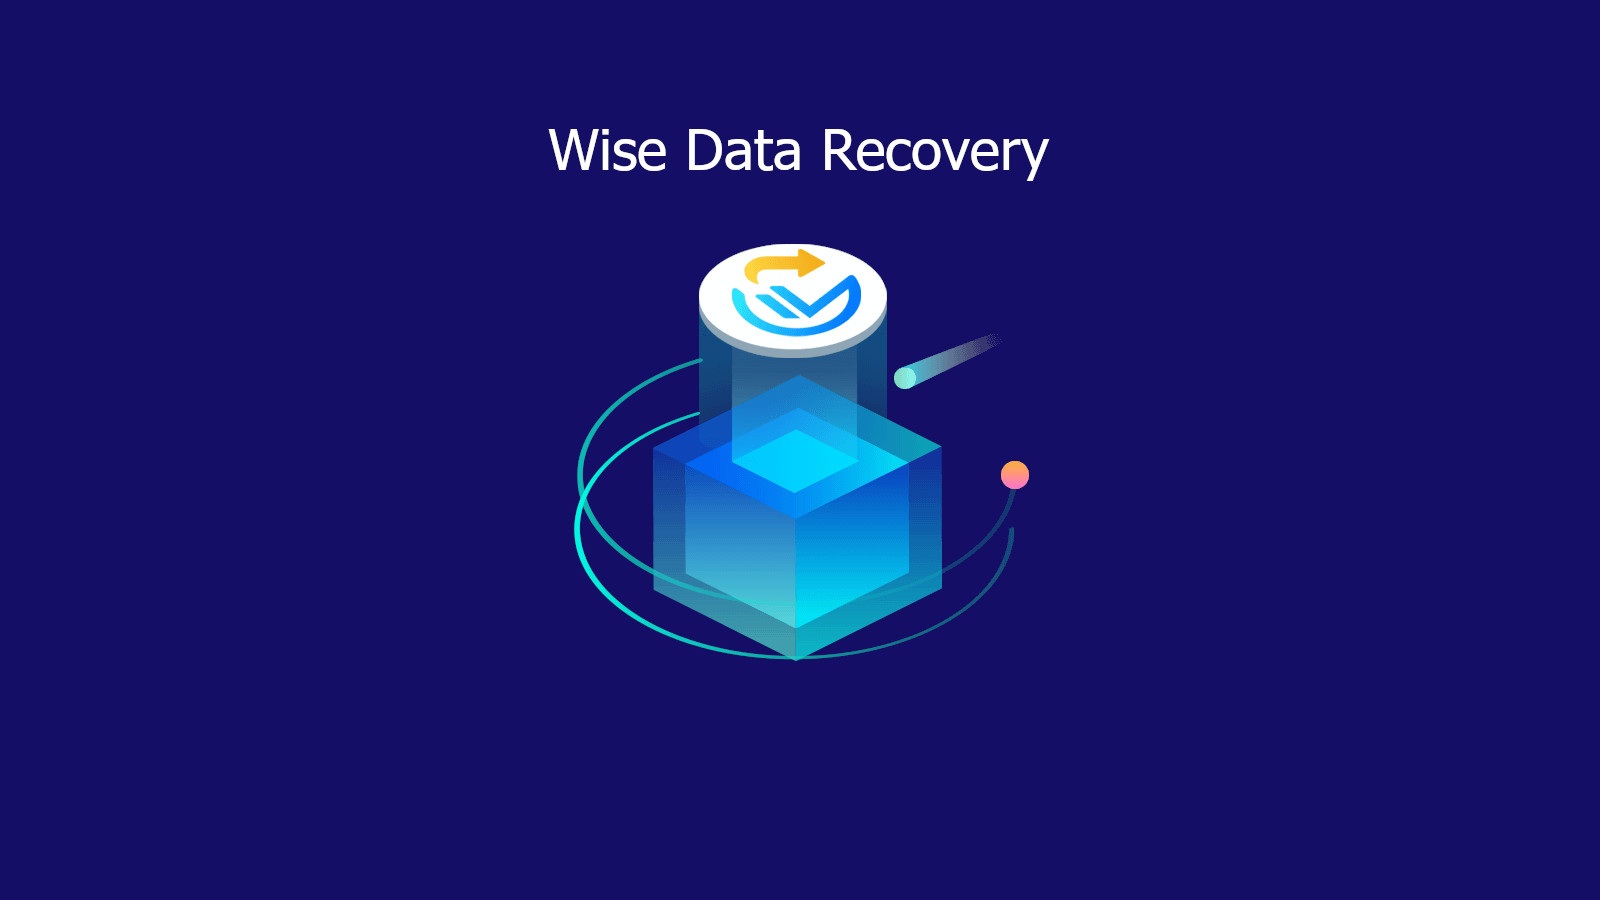 (33.88$) Wise Data Recovery PRO CD Key (1 Year / 1 PC)